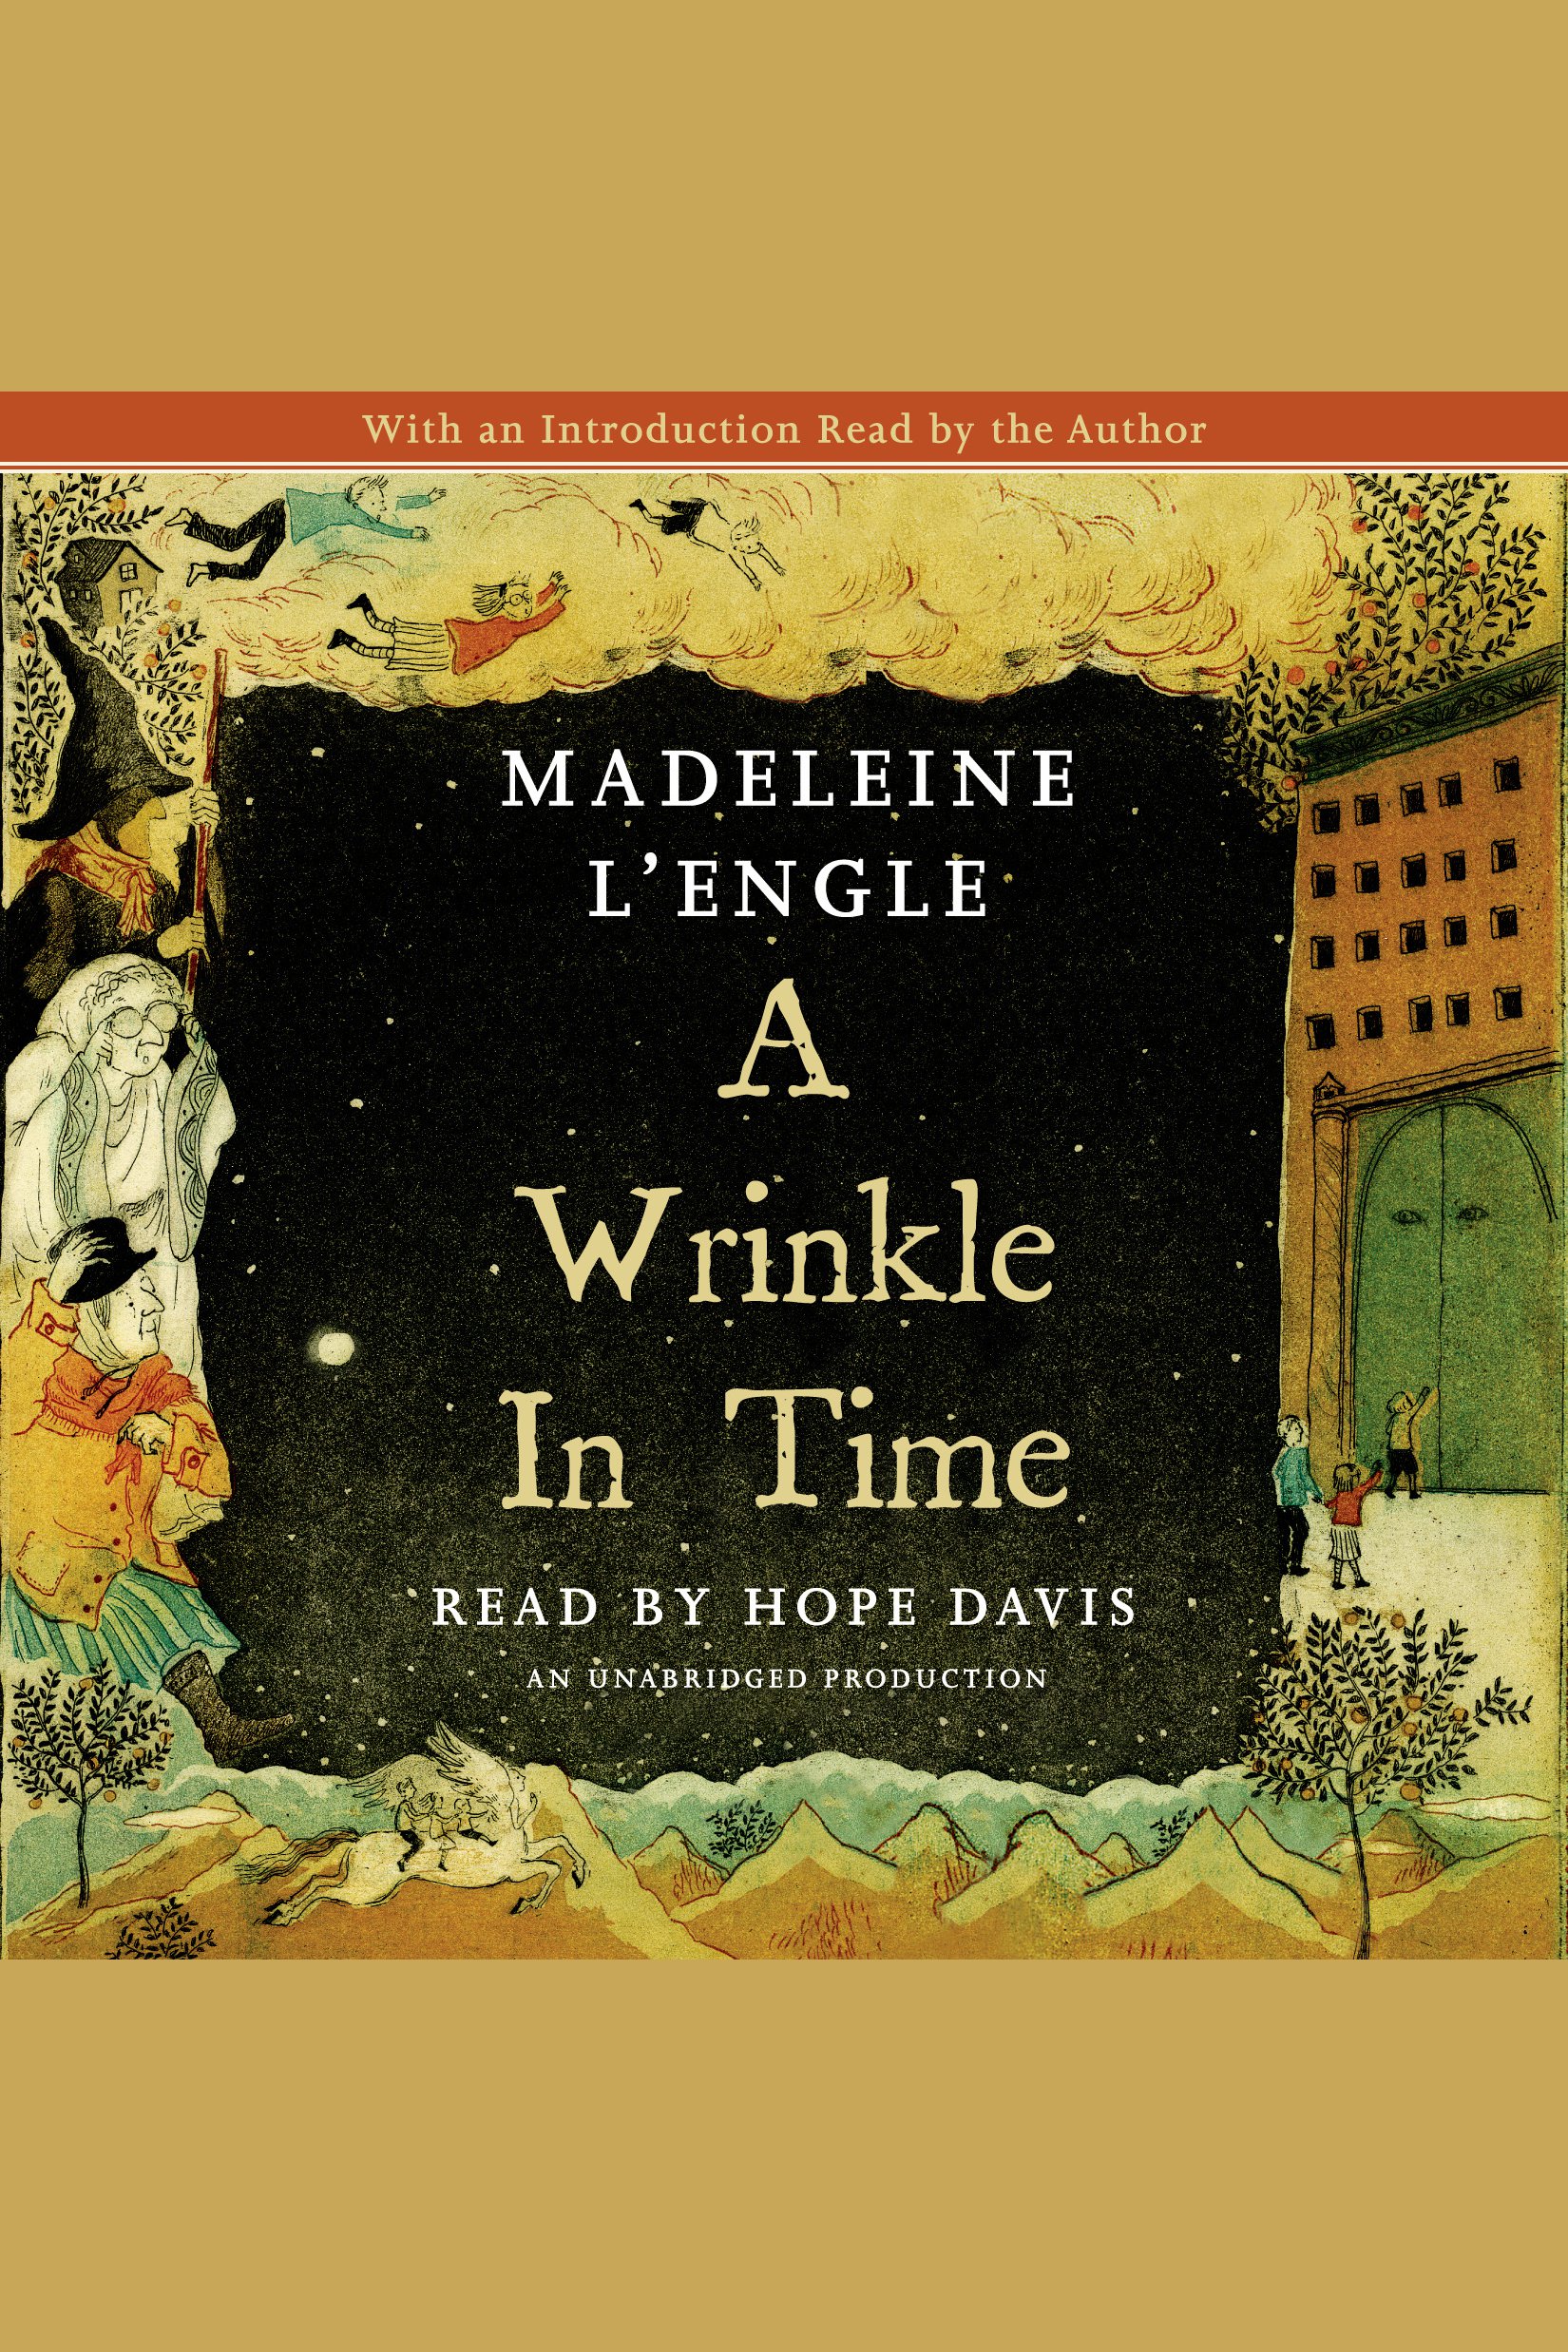 Wrinkle in time cover image